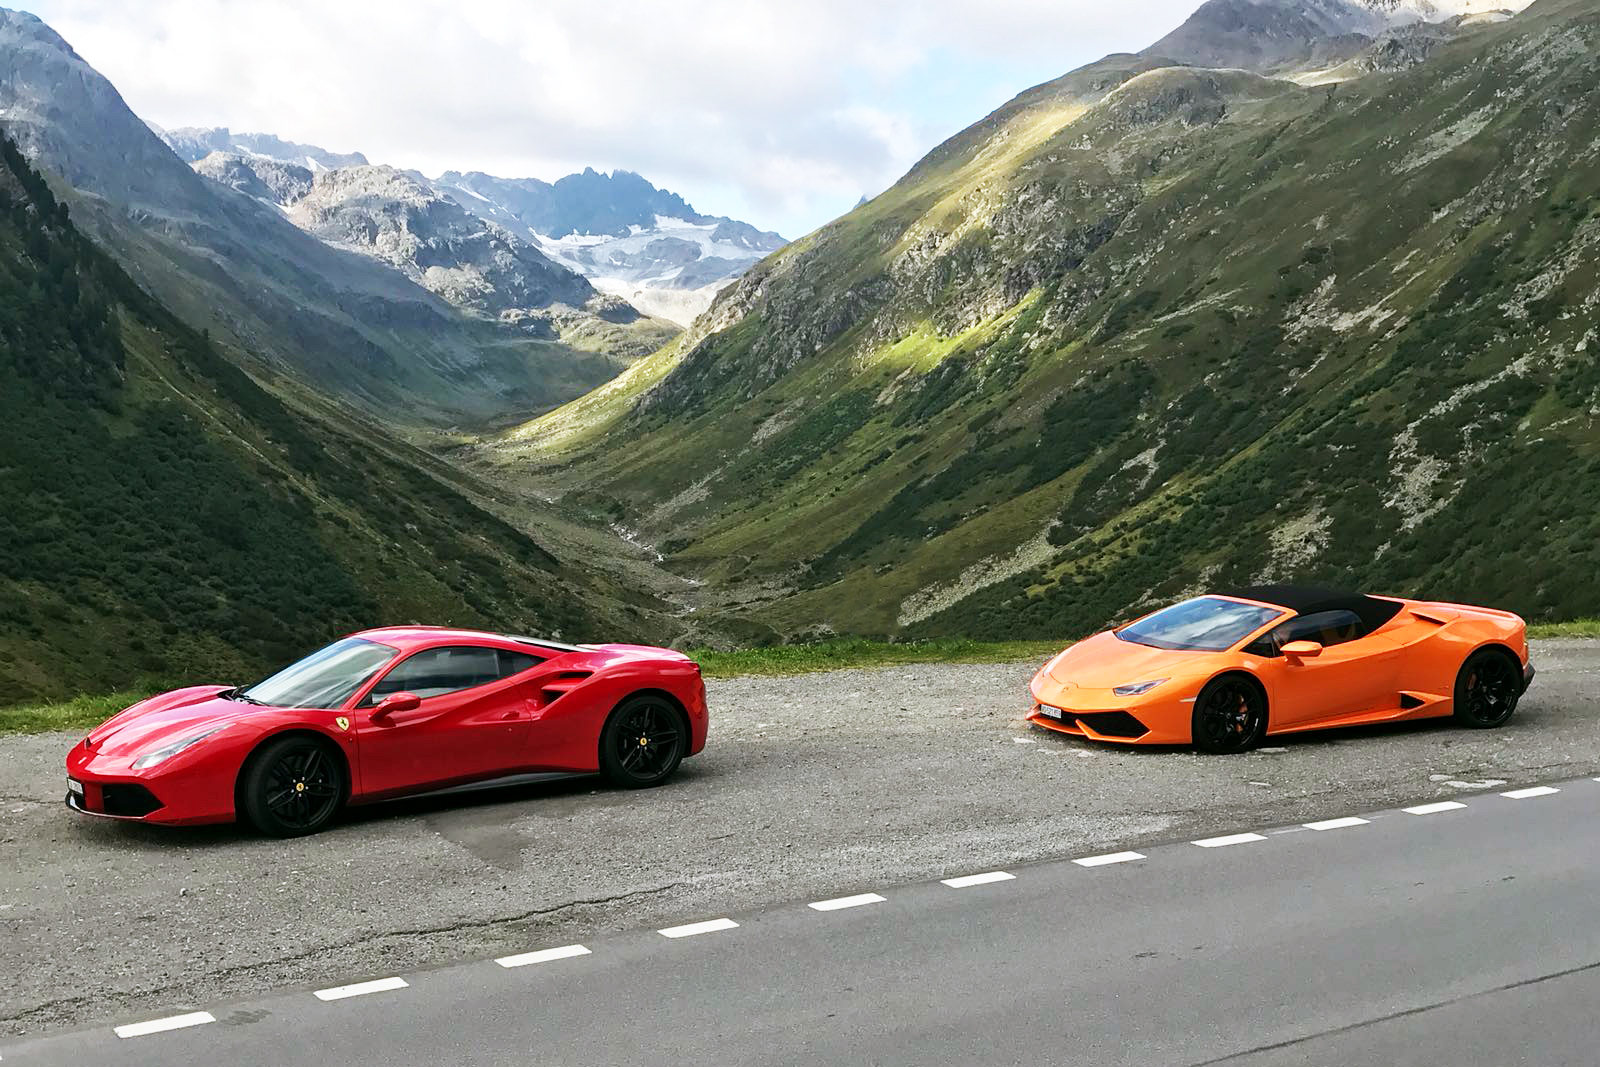 Supercars in the mountains